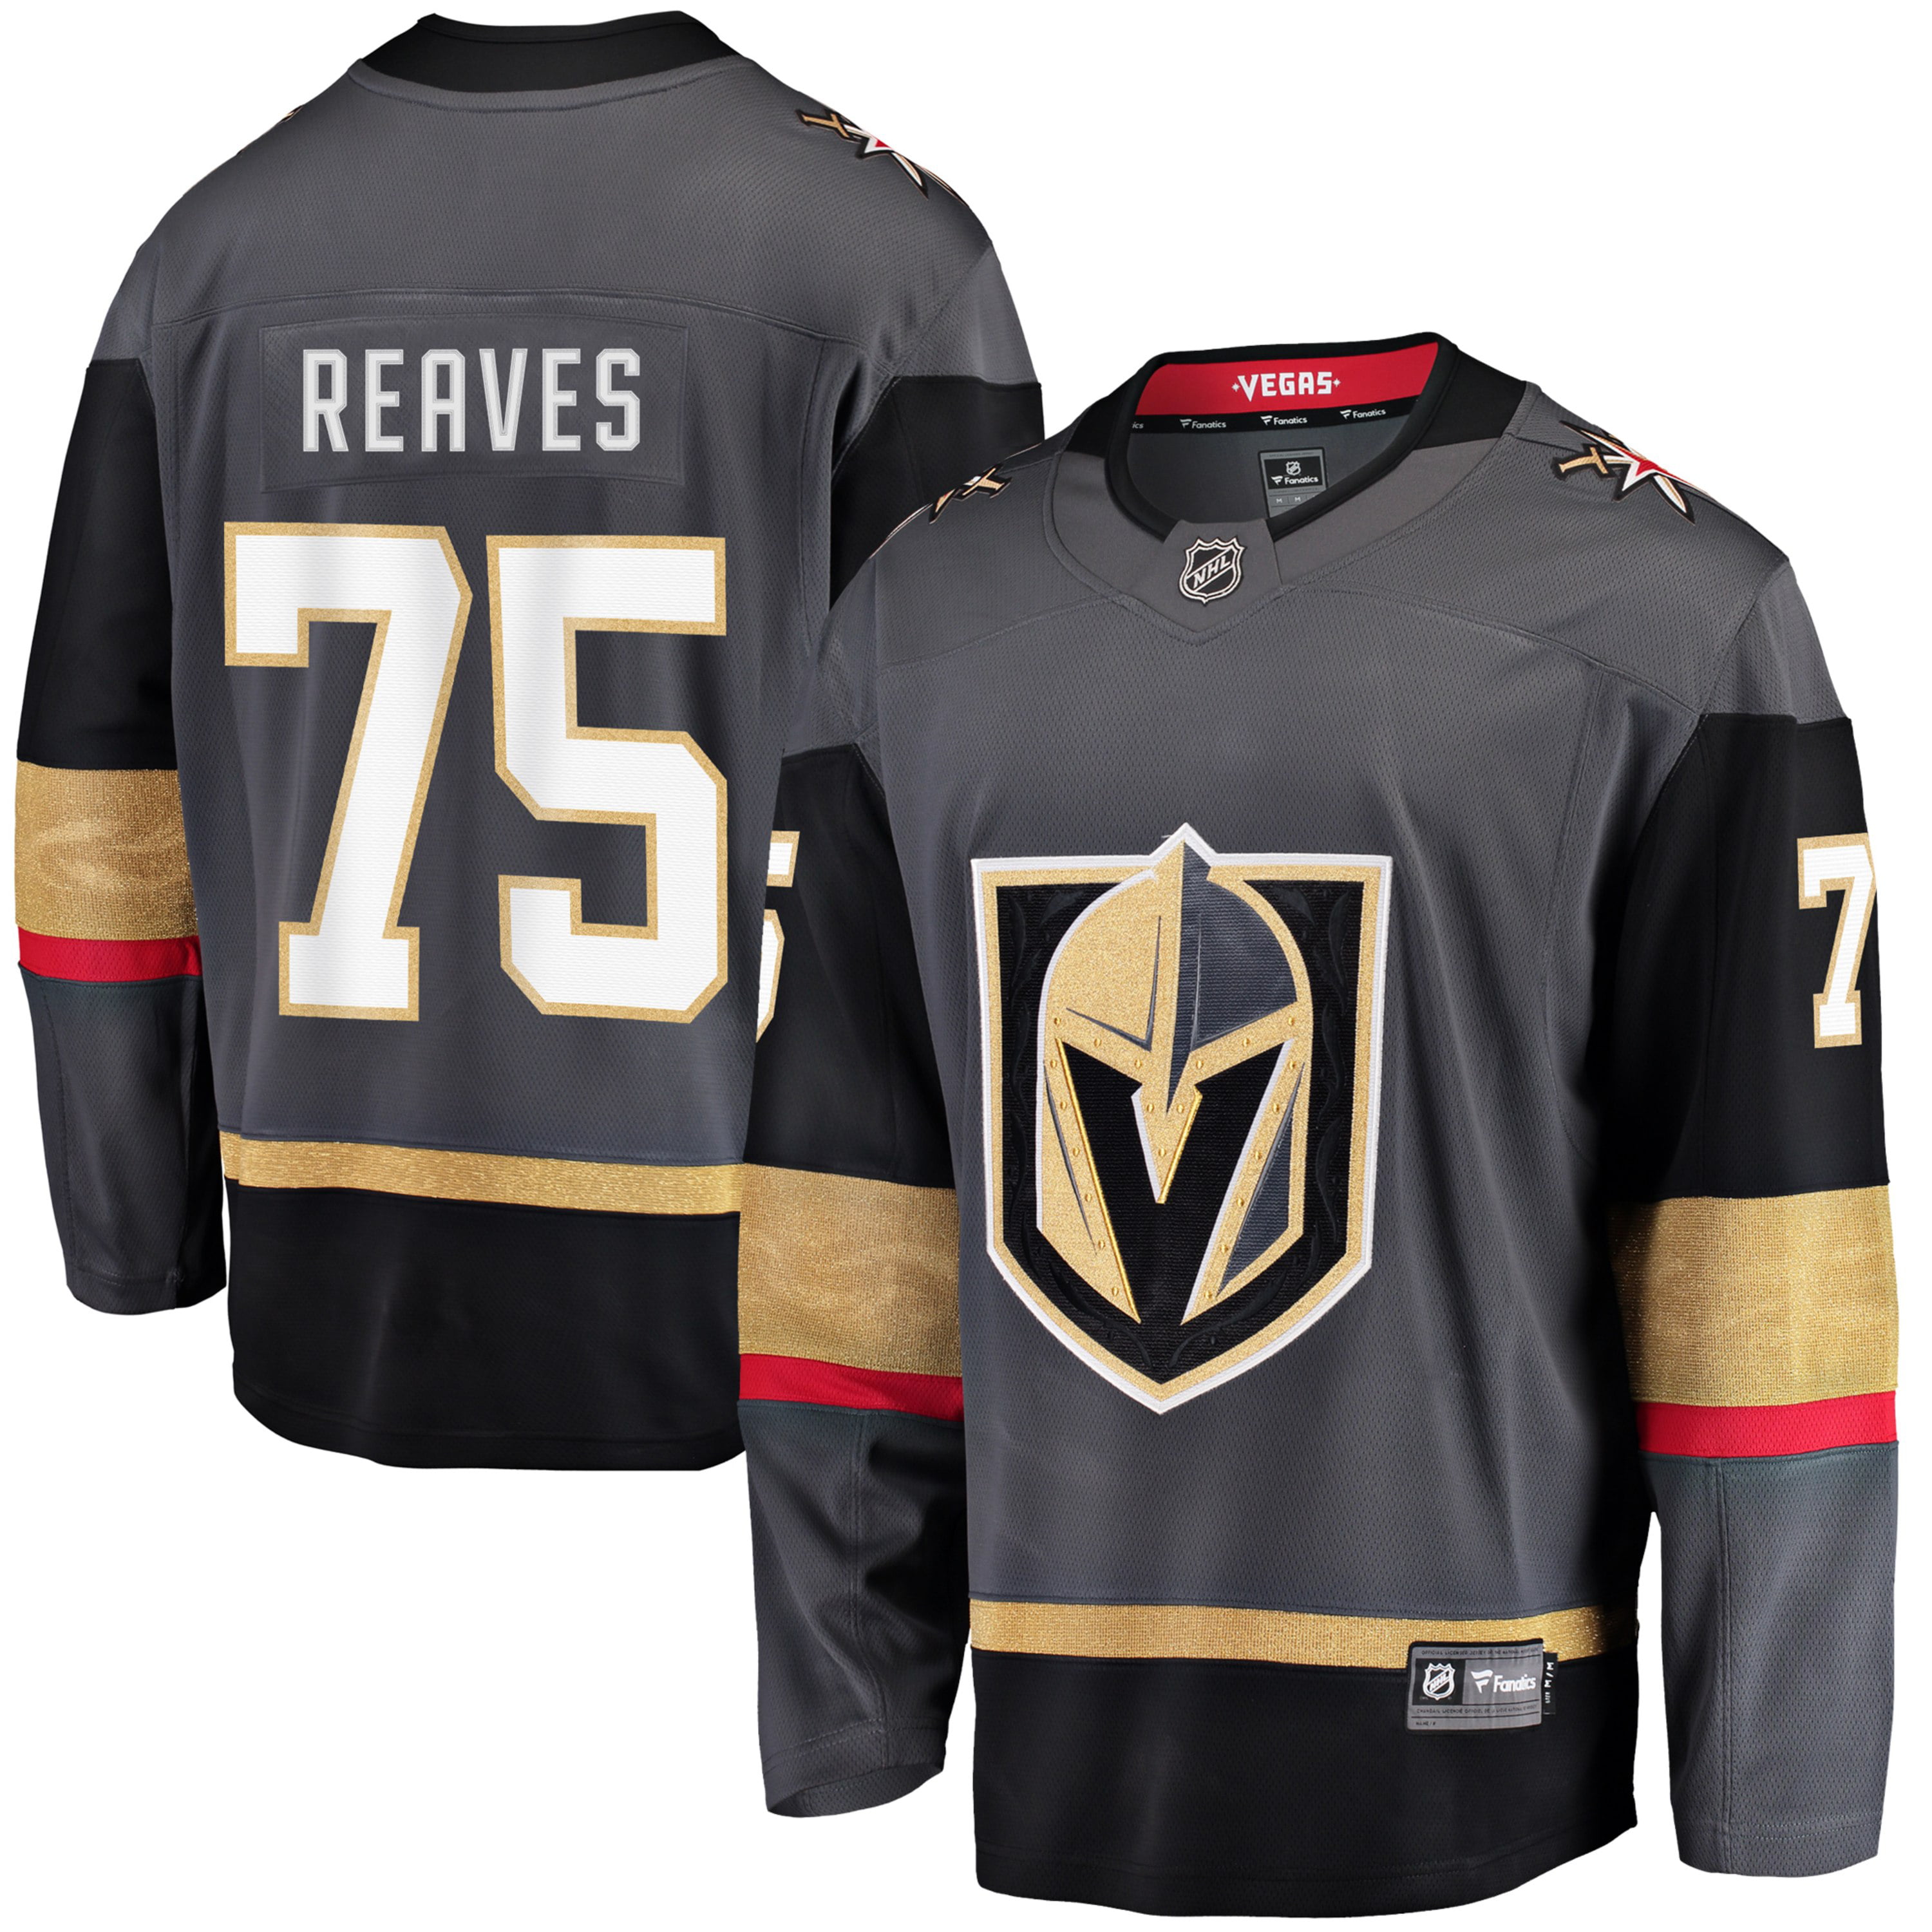 reaves jersey